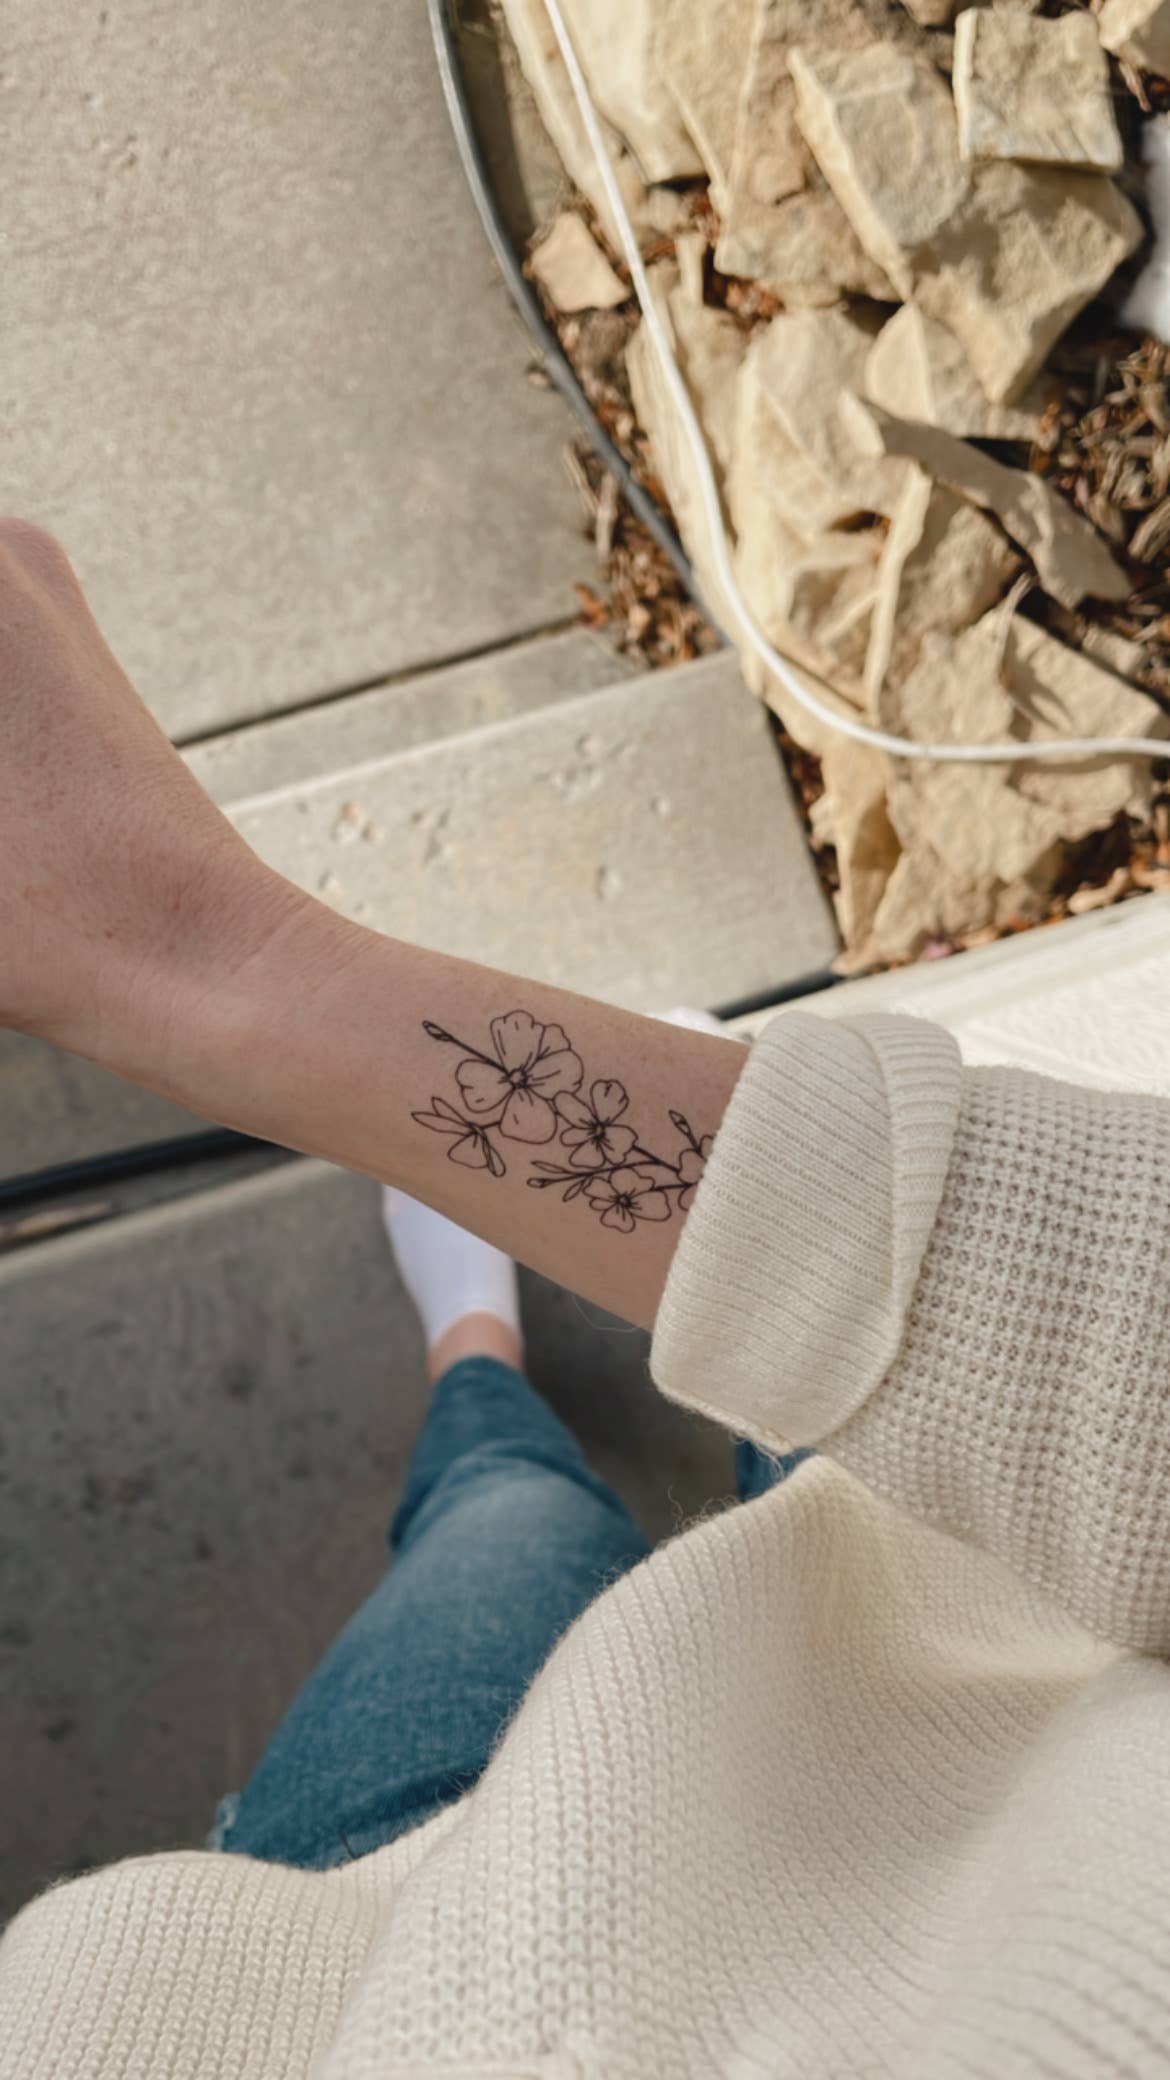 May Birth Flower Tattoo Ideas {Lily of the Valley} - TattooGlee | Birth  flower tattoos, May birth flowers, Lily flower tattoos